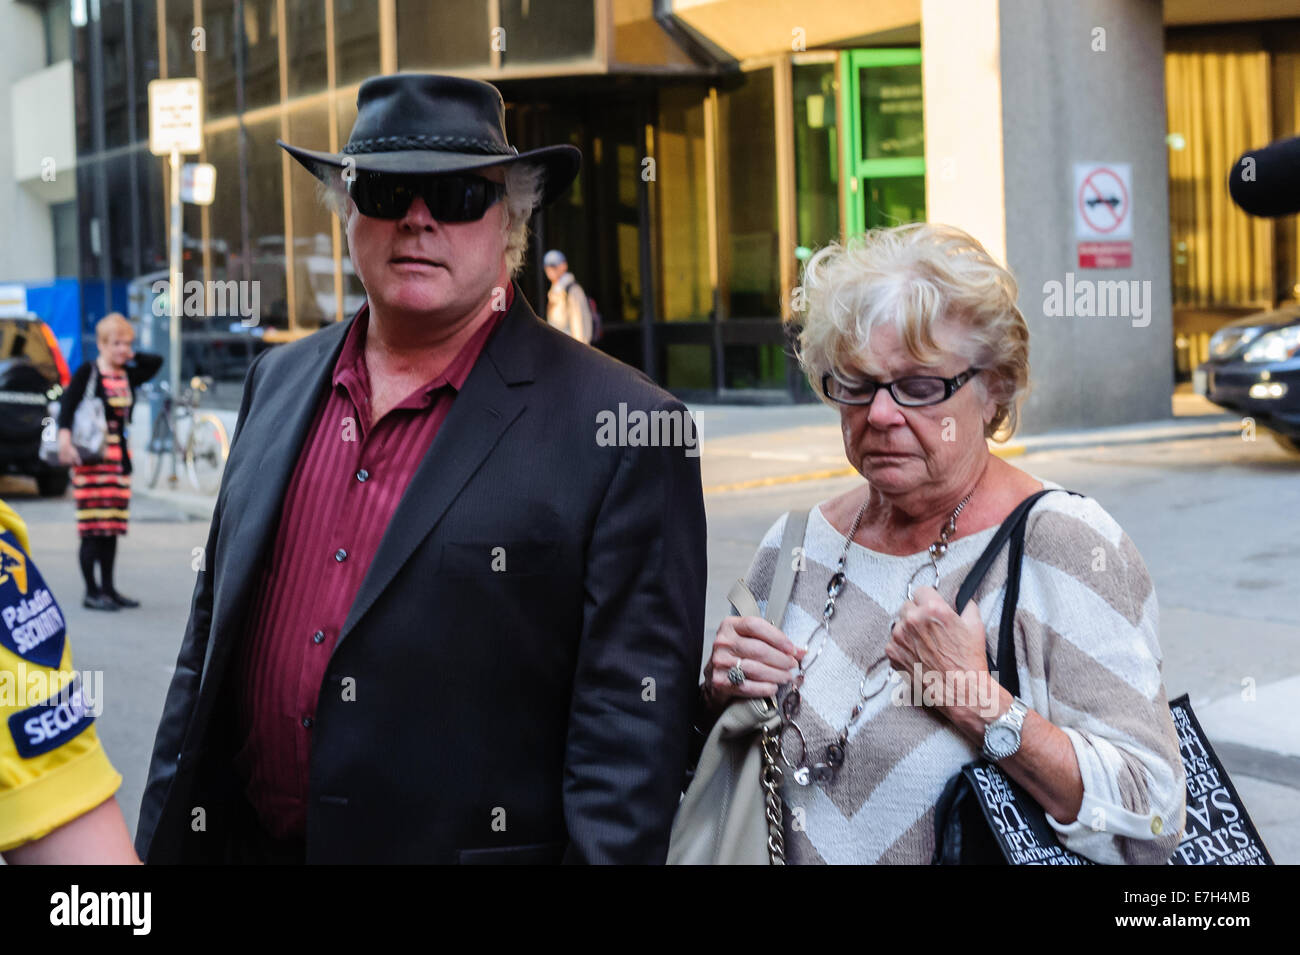 Toronto, CAN., 17 Sep 2014 - Mayor Ford's brother, Randy Ford, and mother  leave Mount Sinai Hospital after visiting Rob. Doctor Zane Cohn of Mount  Sinai Hospital in Toronto briefed the media